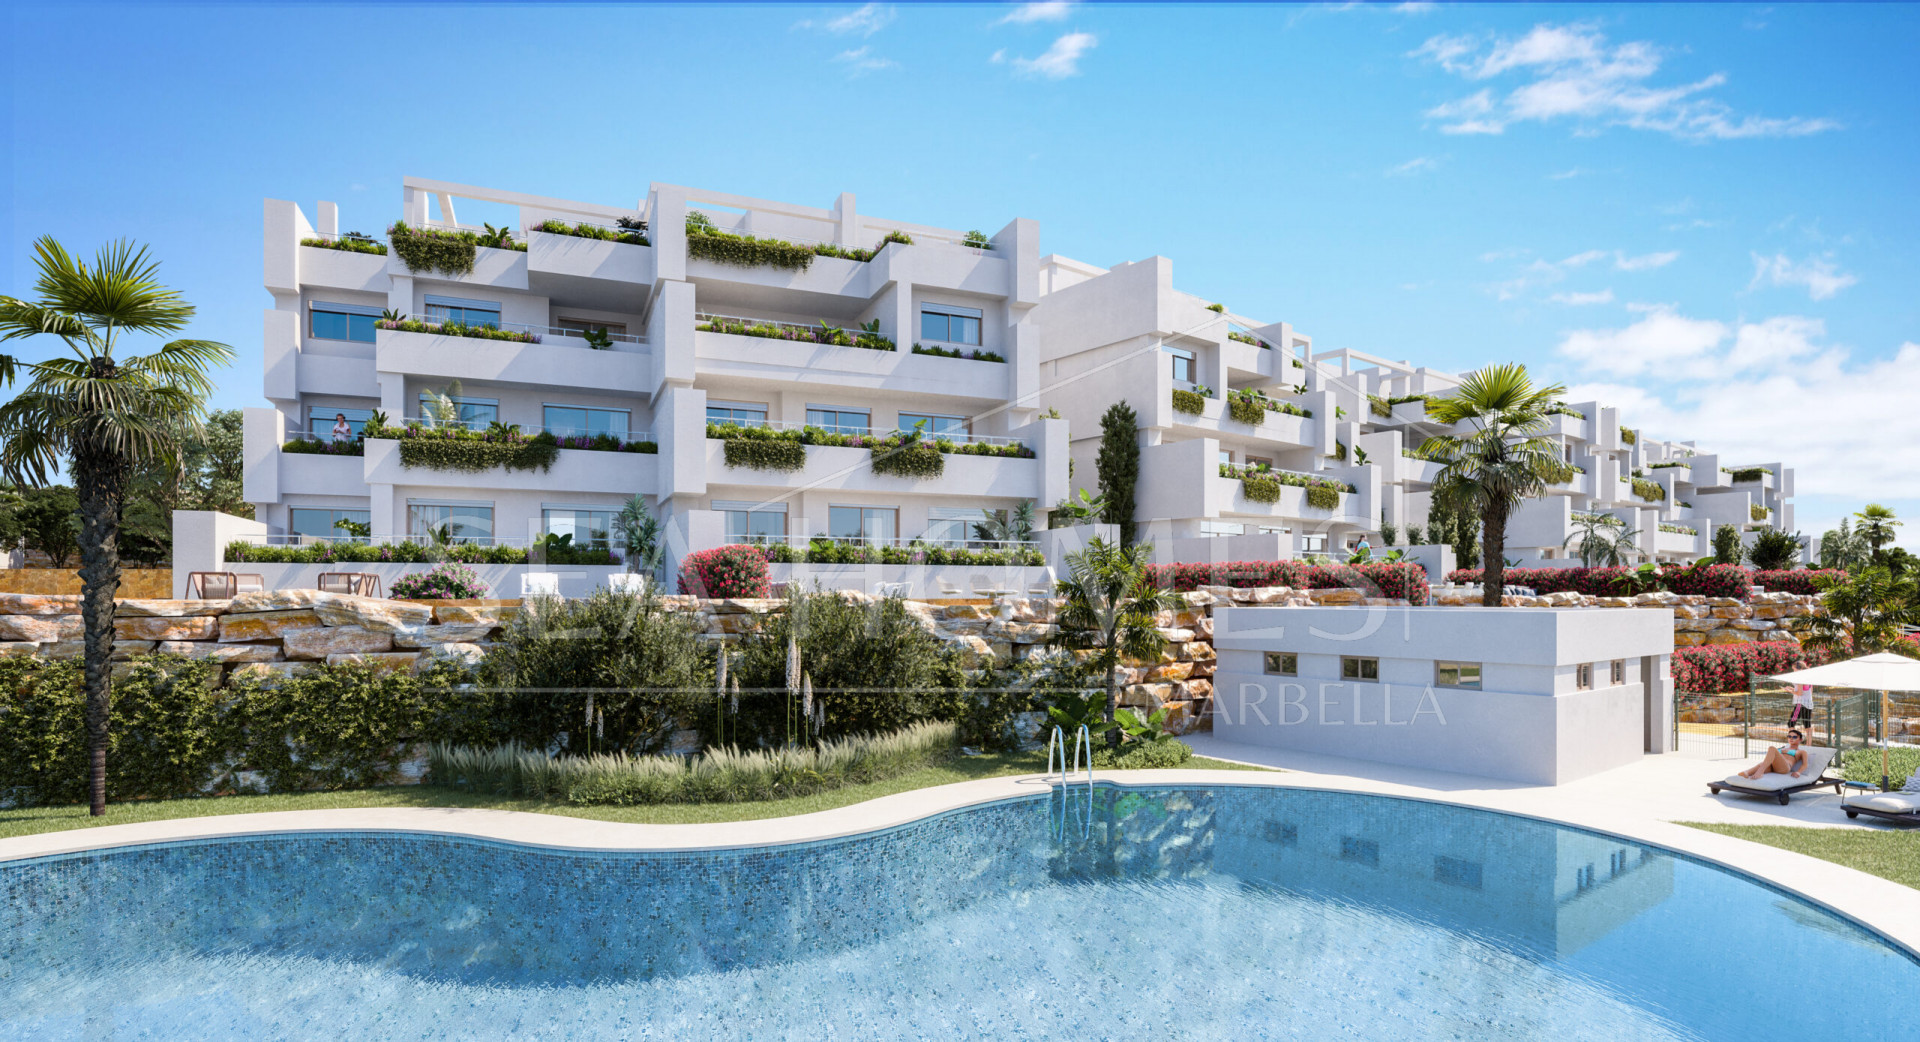 Aby Estepona, apartments and duplex penthouses in a privileged location